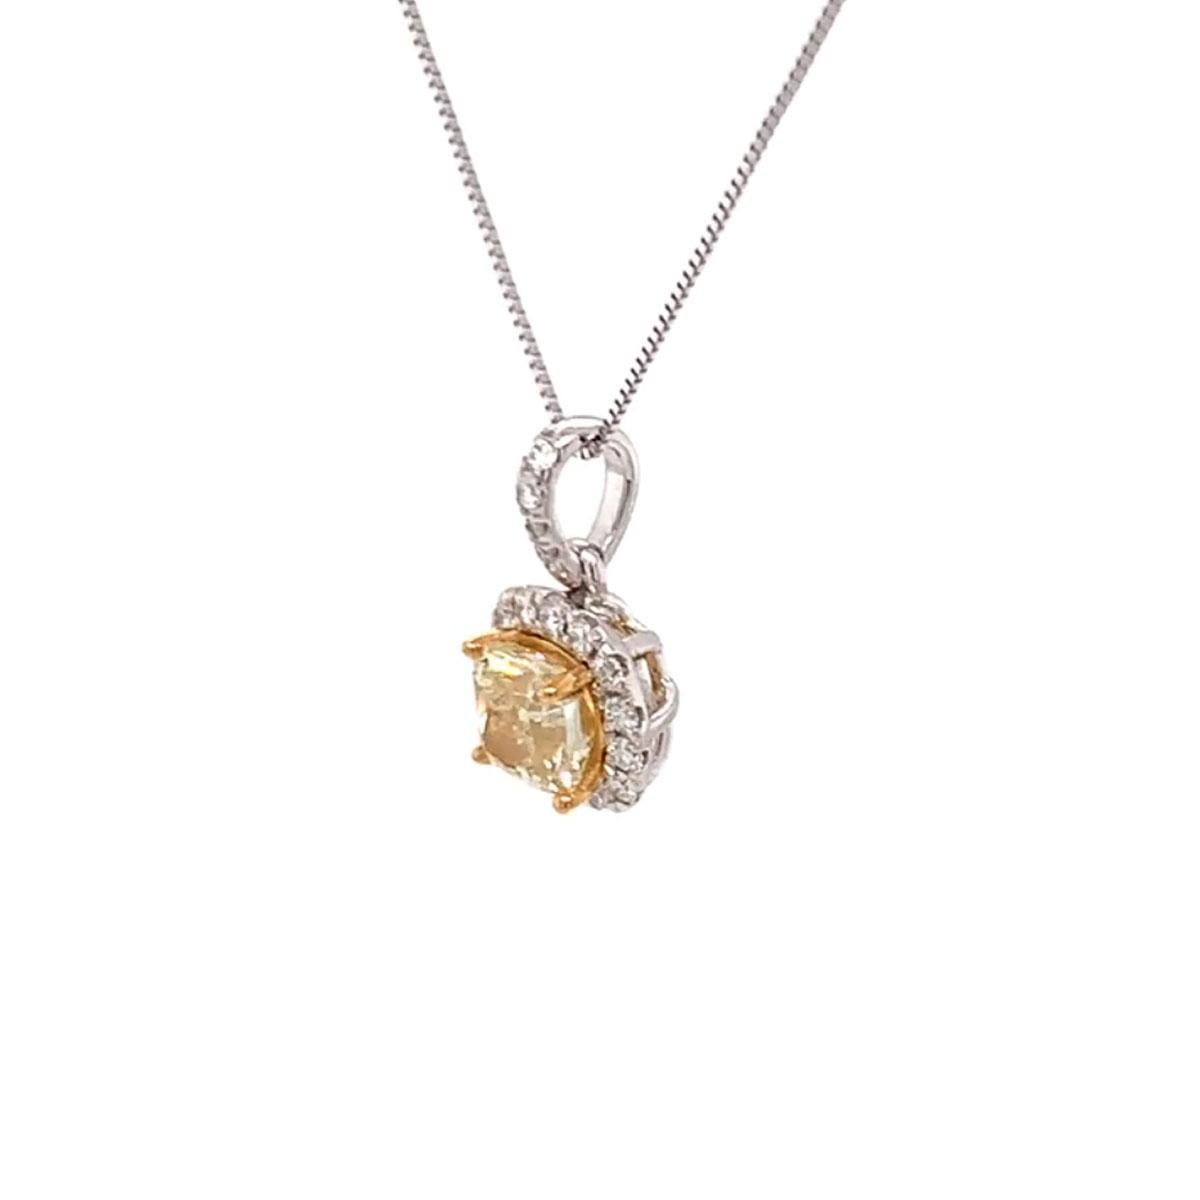 This stunning 18k White gold and 22k Yellow gold pendant feature a 1.57 Carat Yellow square cushion-shaped diamond encircled by a row of brilliant round diamonds on a 1 mm chain.
The chain can be either 18 inches or 16 inches long.
The small